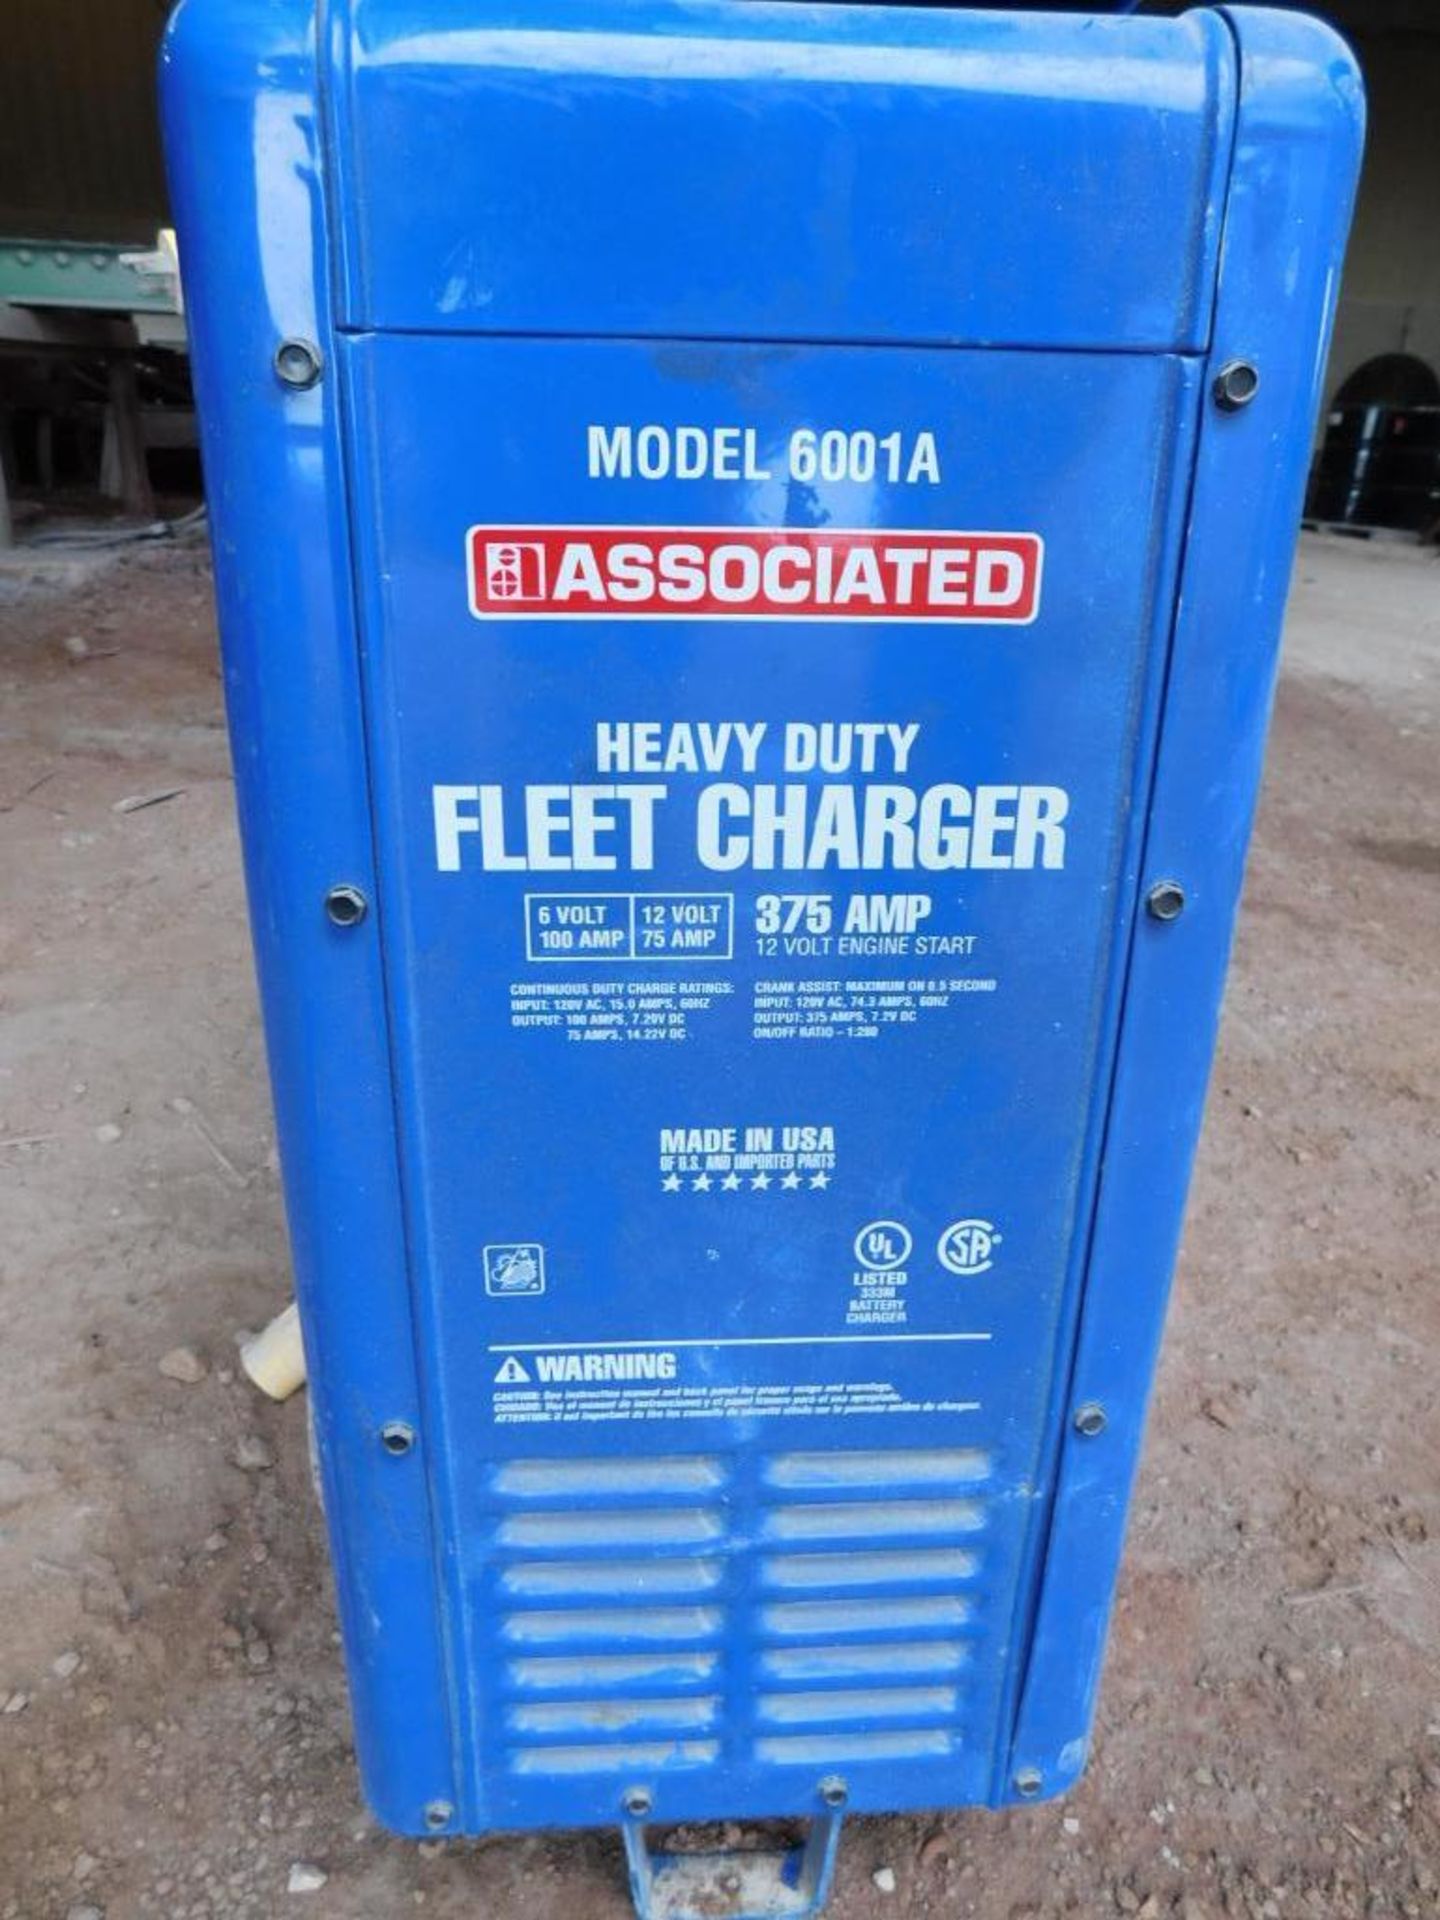 Heavy Duty Fleet Charger - Image 2 of 3